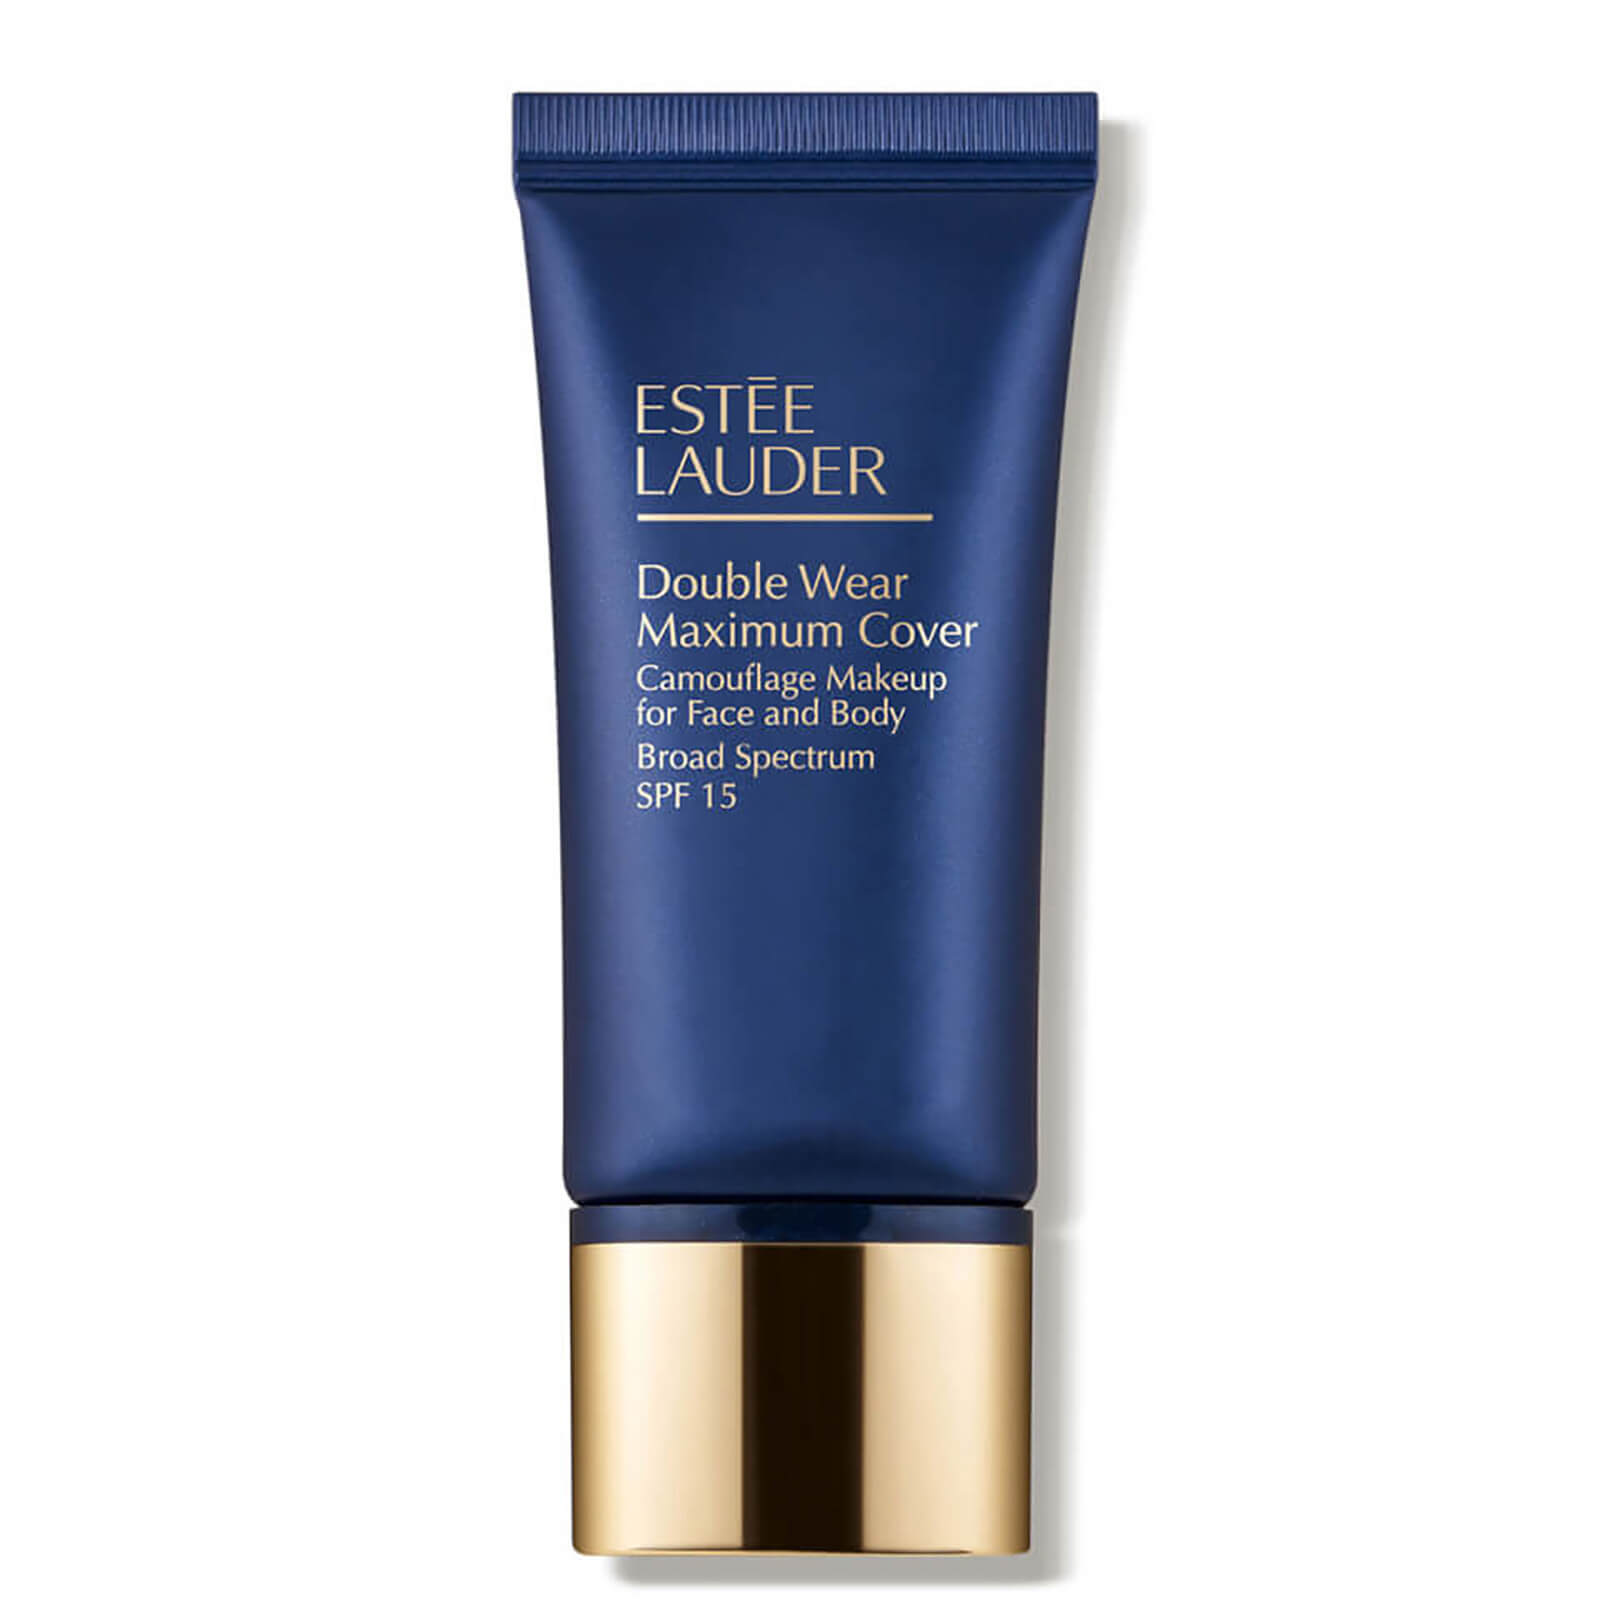 Estée Lauder Double Wear Maximum Cover Camouflage Makeup For Face And Body Spf 15 (1 Oz.) In 2w1 Dawn